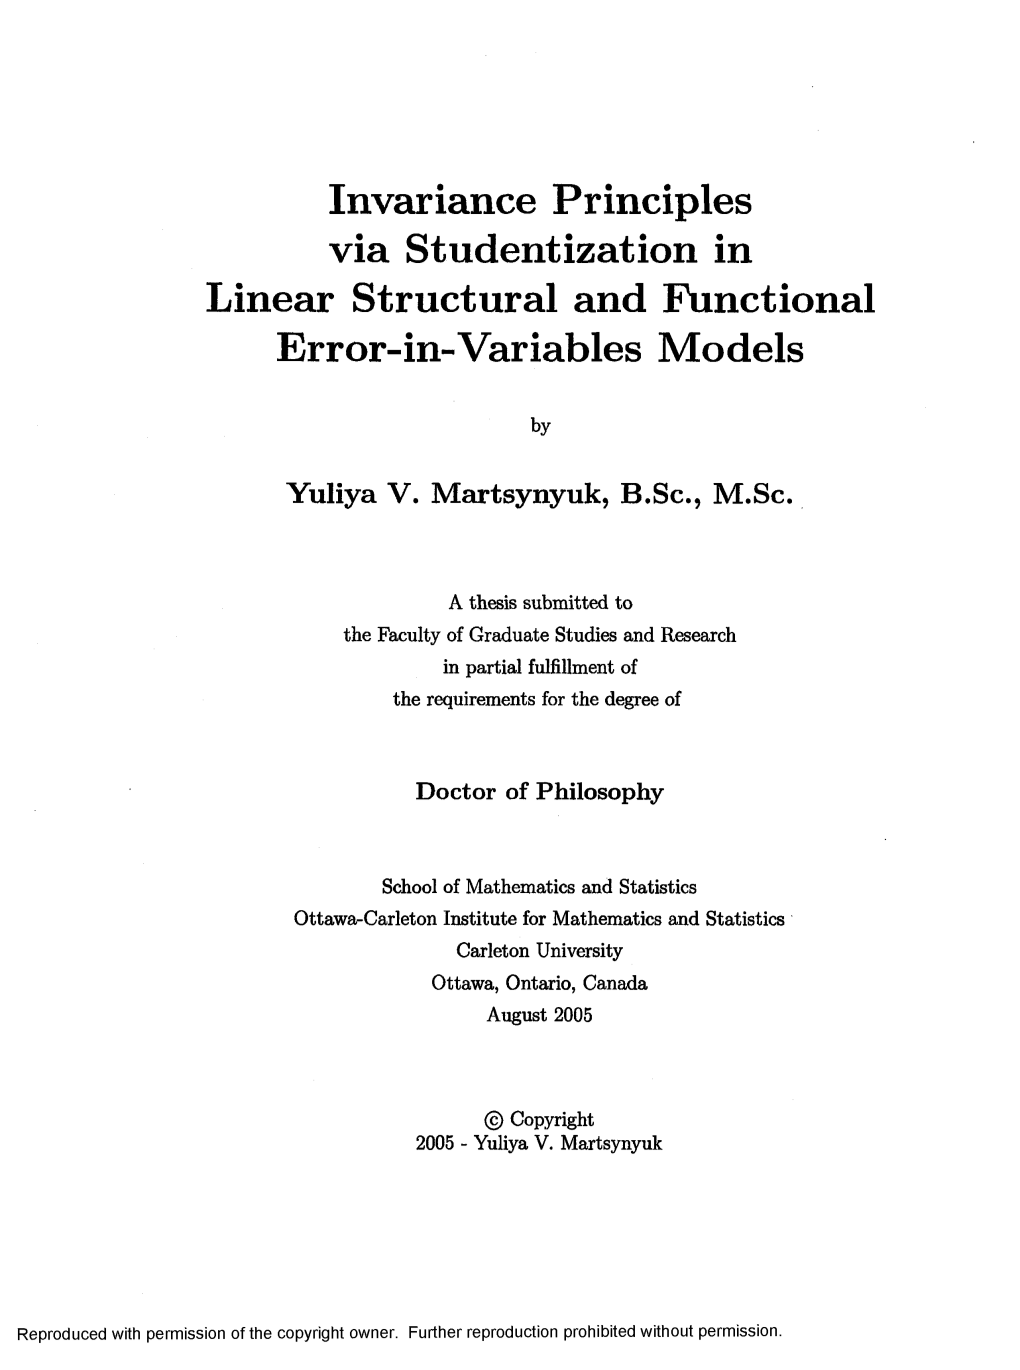 Invariance Principles Via Studentization in Linear Structural and Functional Error-In-Variables Models